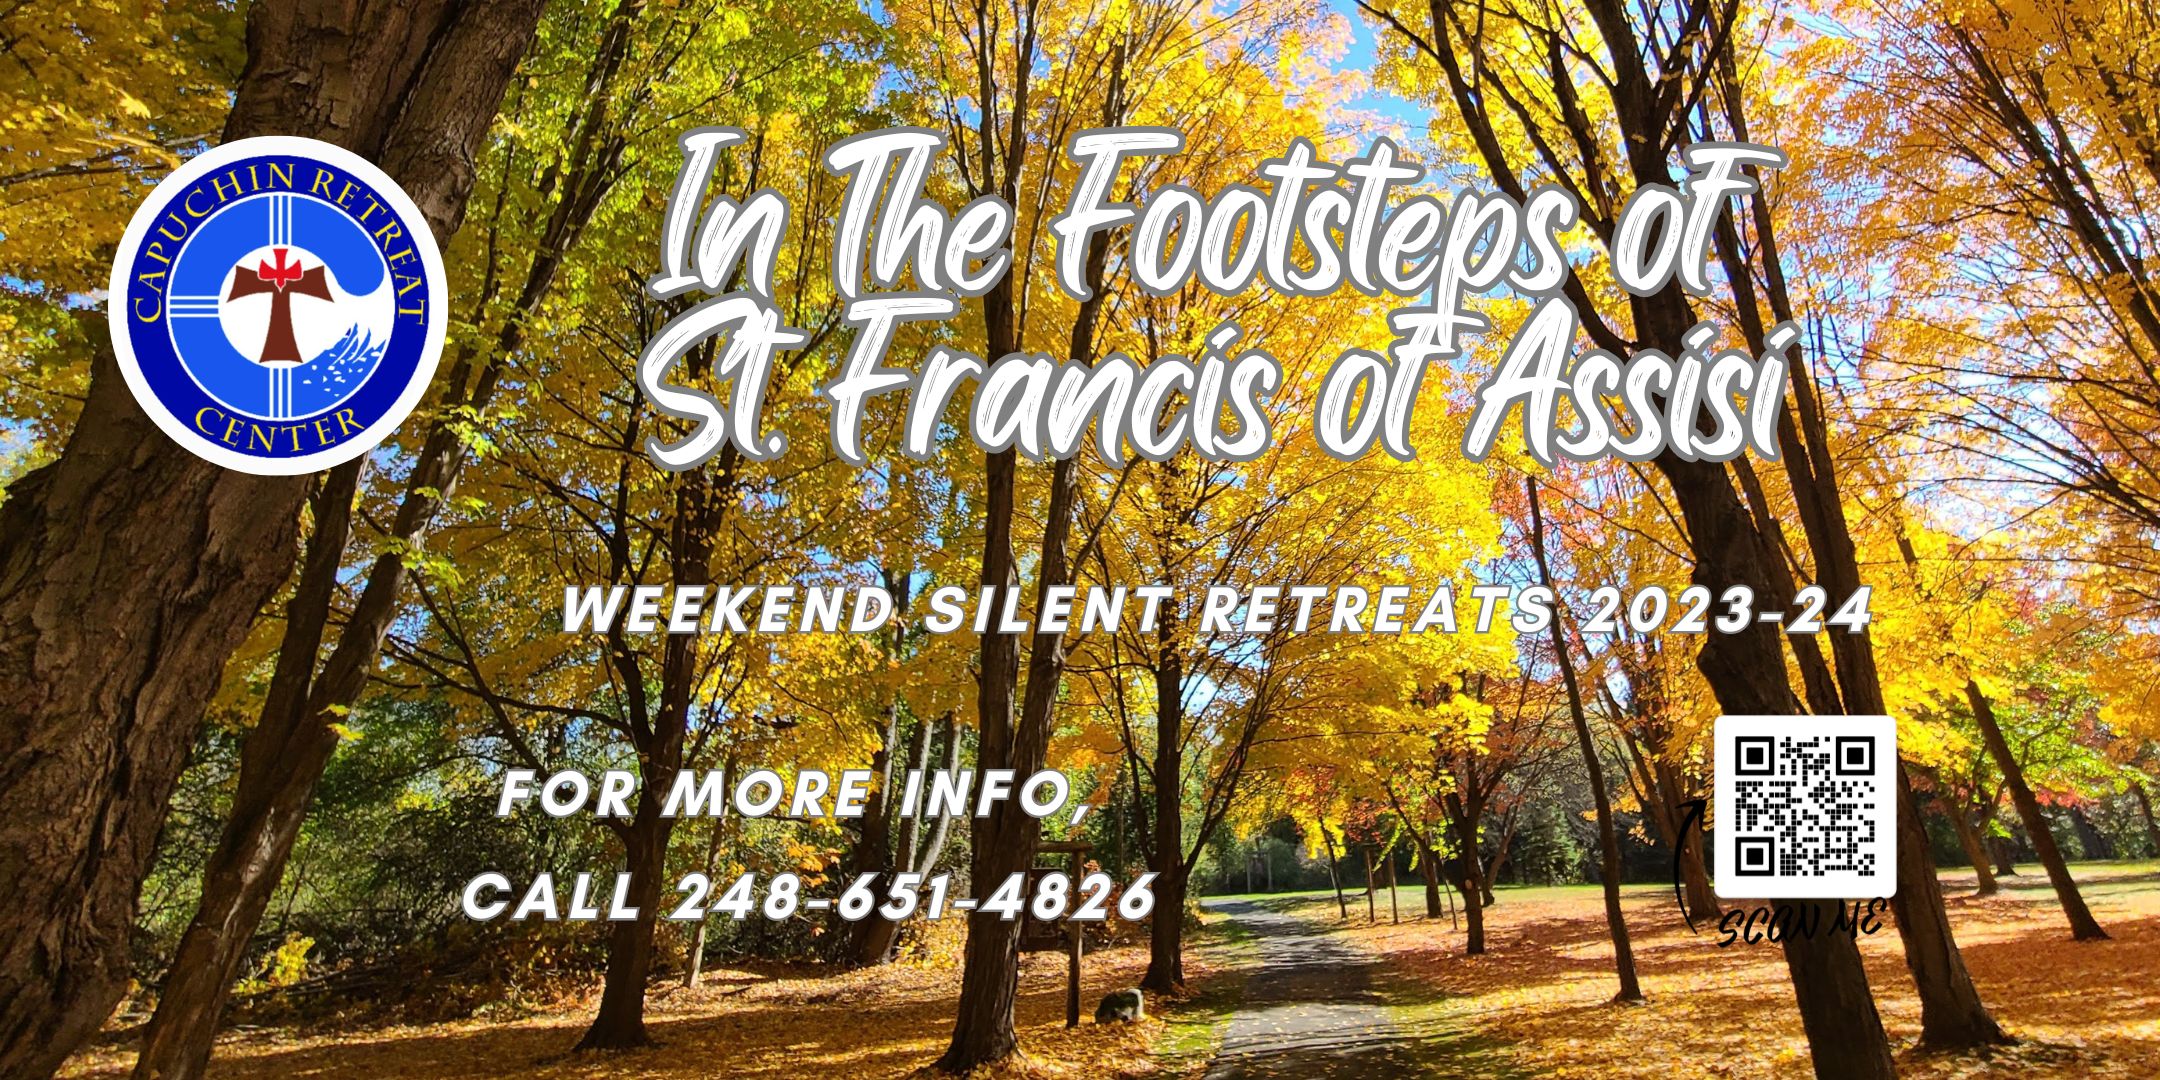 Men’s Weekend Retreat: “In the Footsteps of St. Francis of Assisi.”